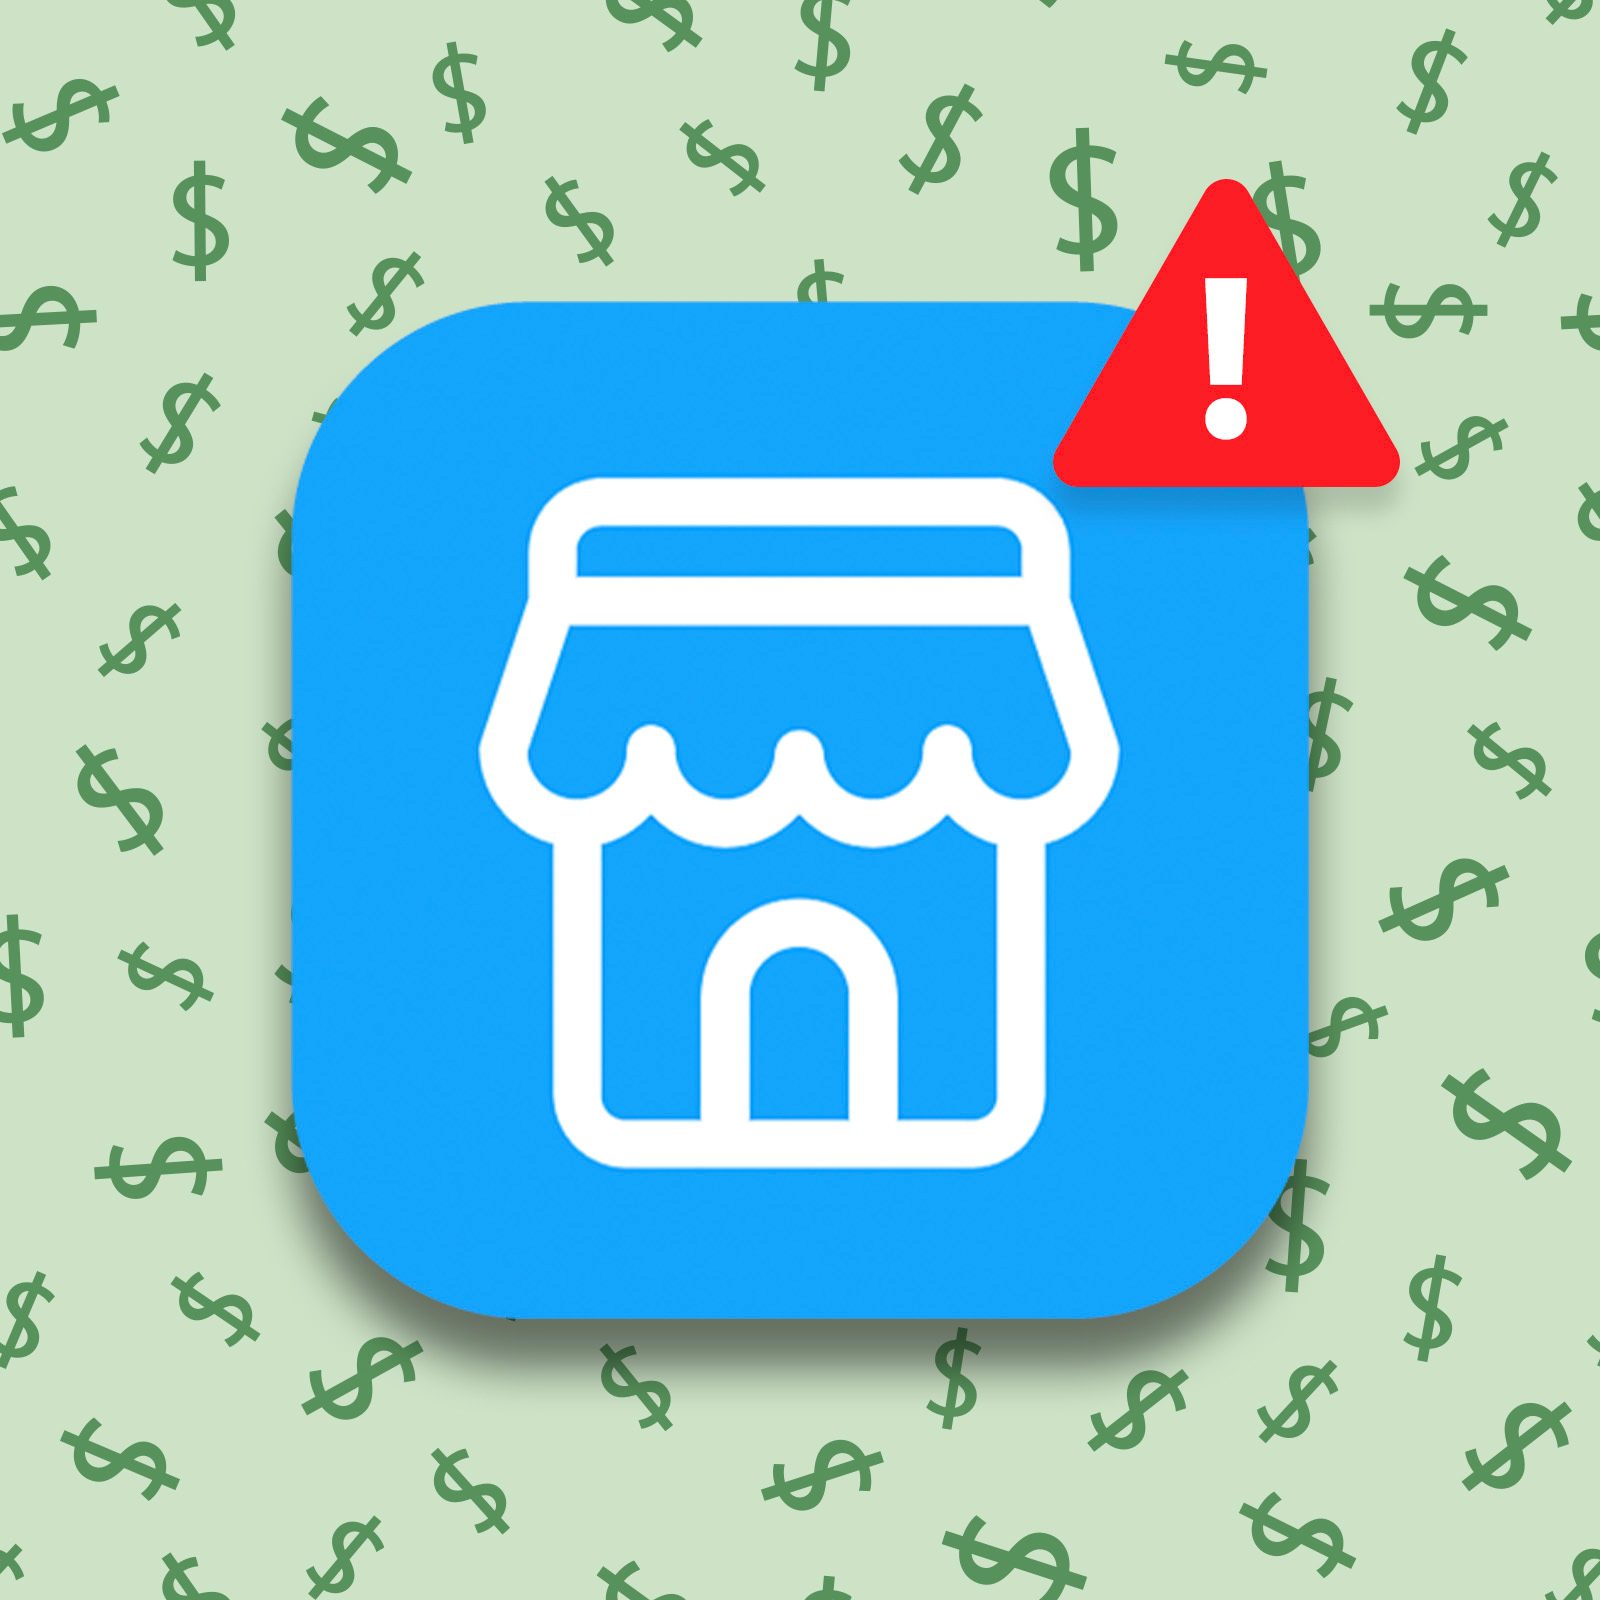 facebook market place logo with warning symbol on a green dollar sign background